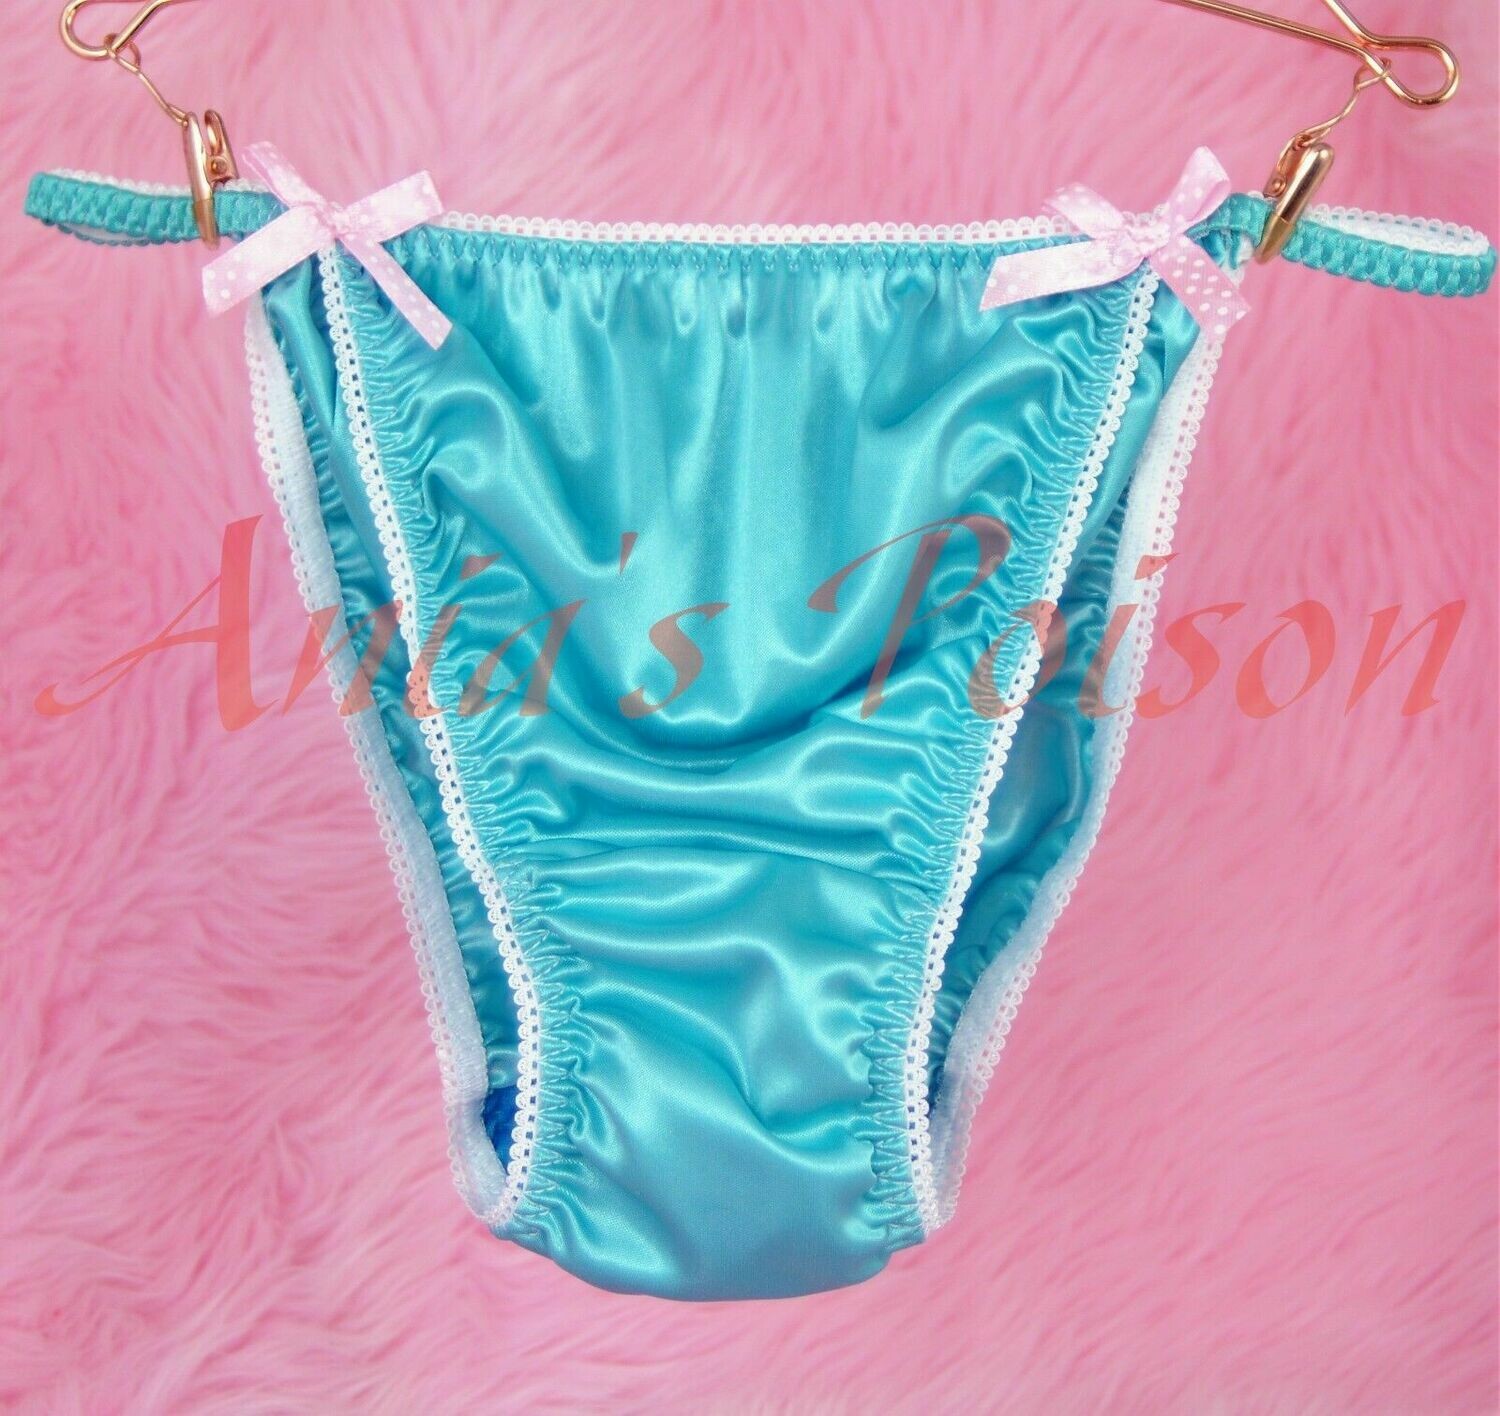 Ania's Poison MANties S - XL shiny Rare Butter Soft Collection polyester string bikini sissy mens underwear panties